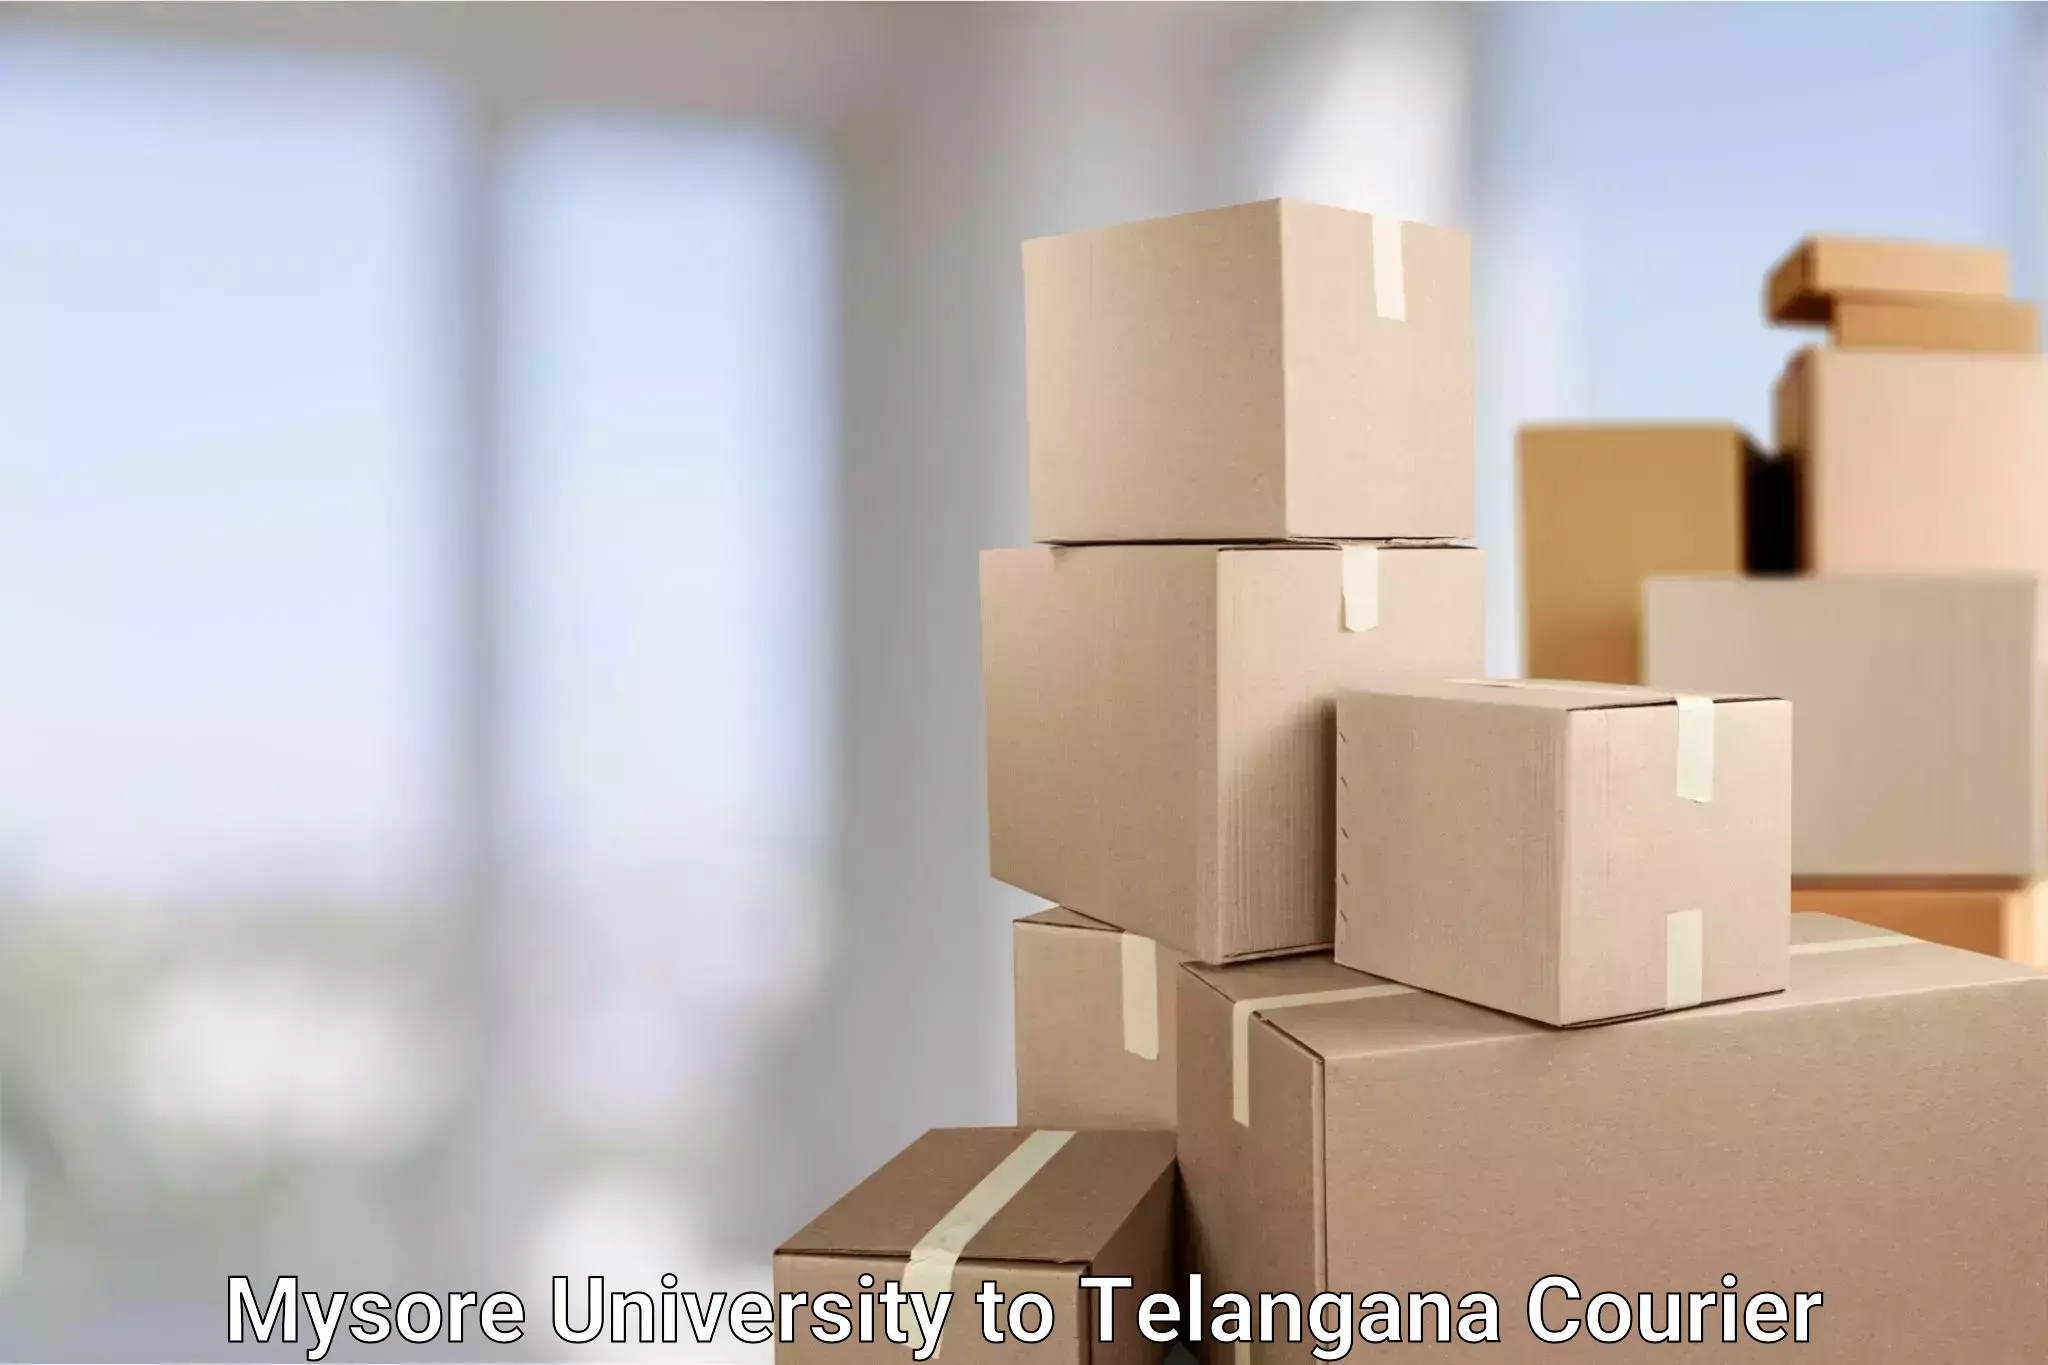 Expedited parcel delivery Mysore University to Telangana